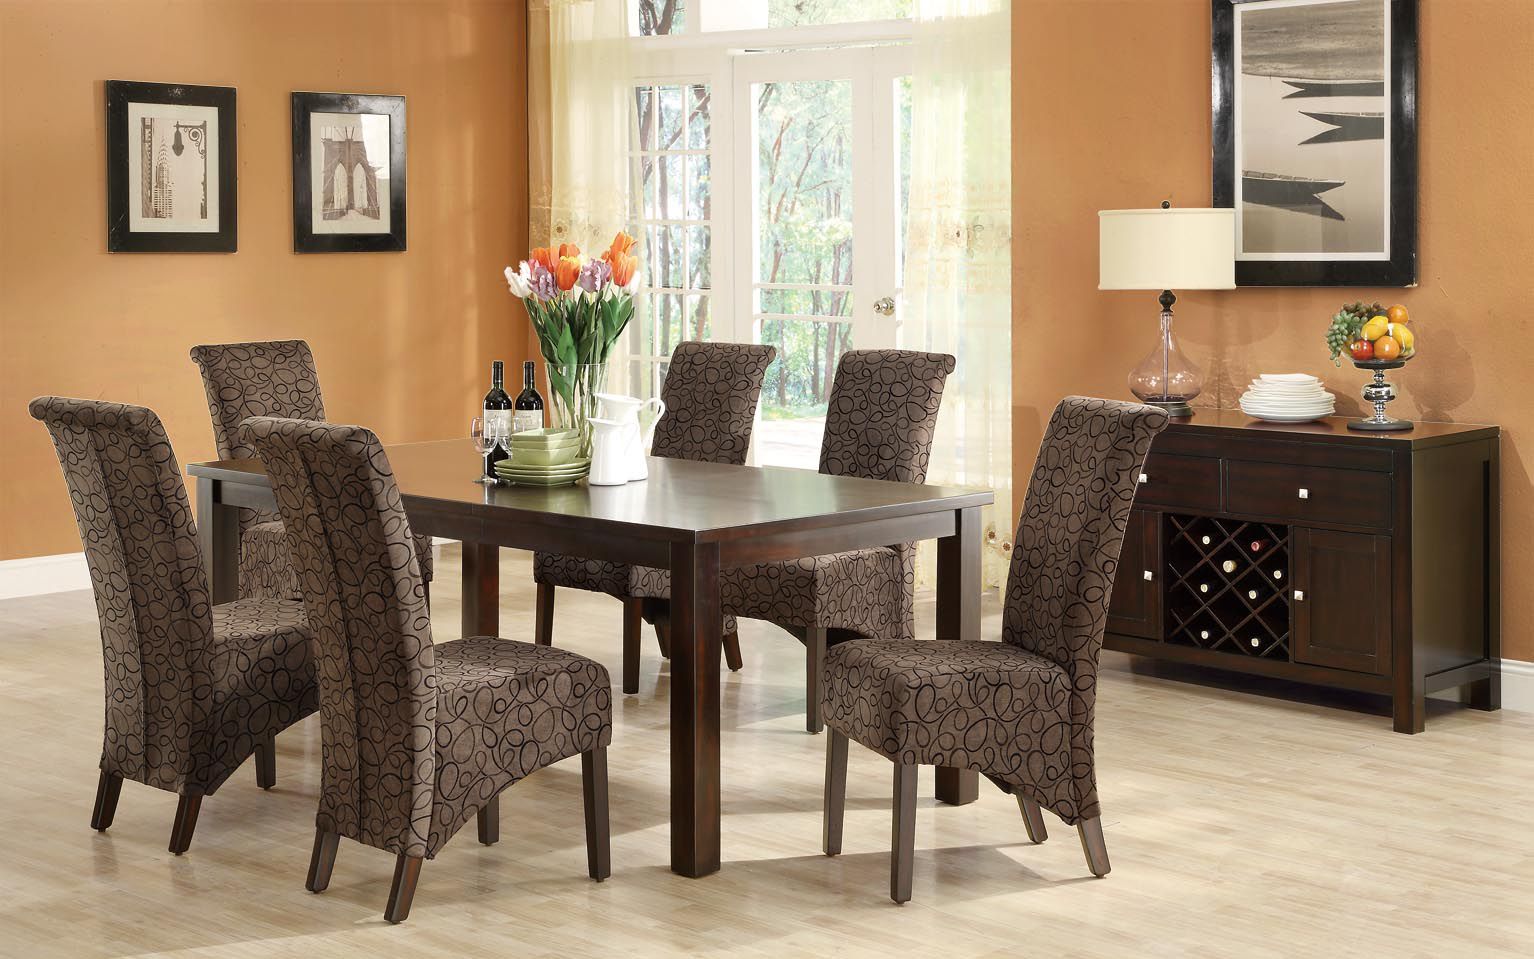 Monarch Specialties DINING CHAIR - 2PCS / 40"H / BROWN SWIRL FABRIC